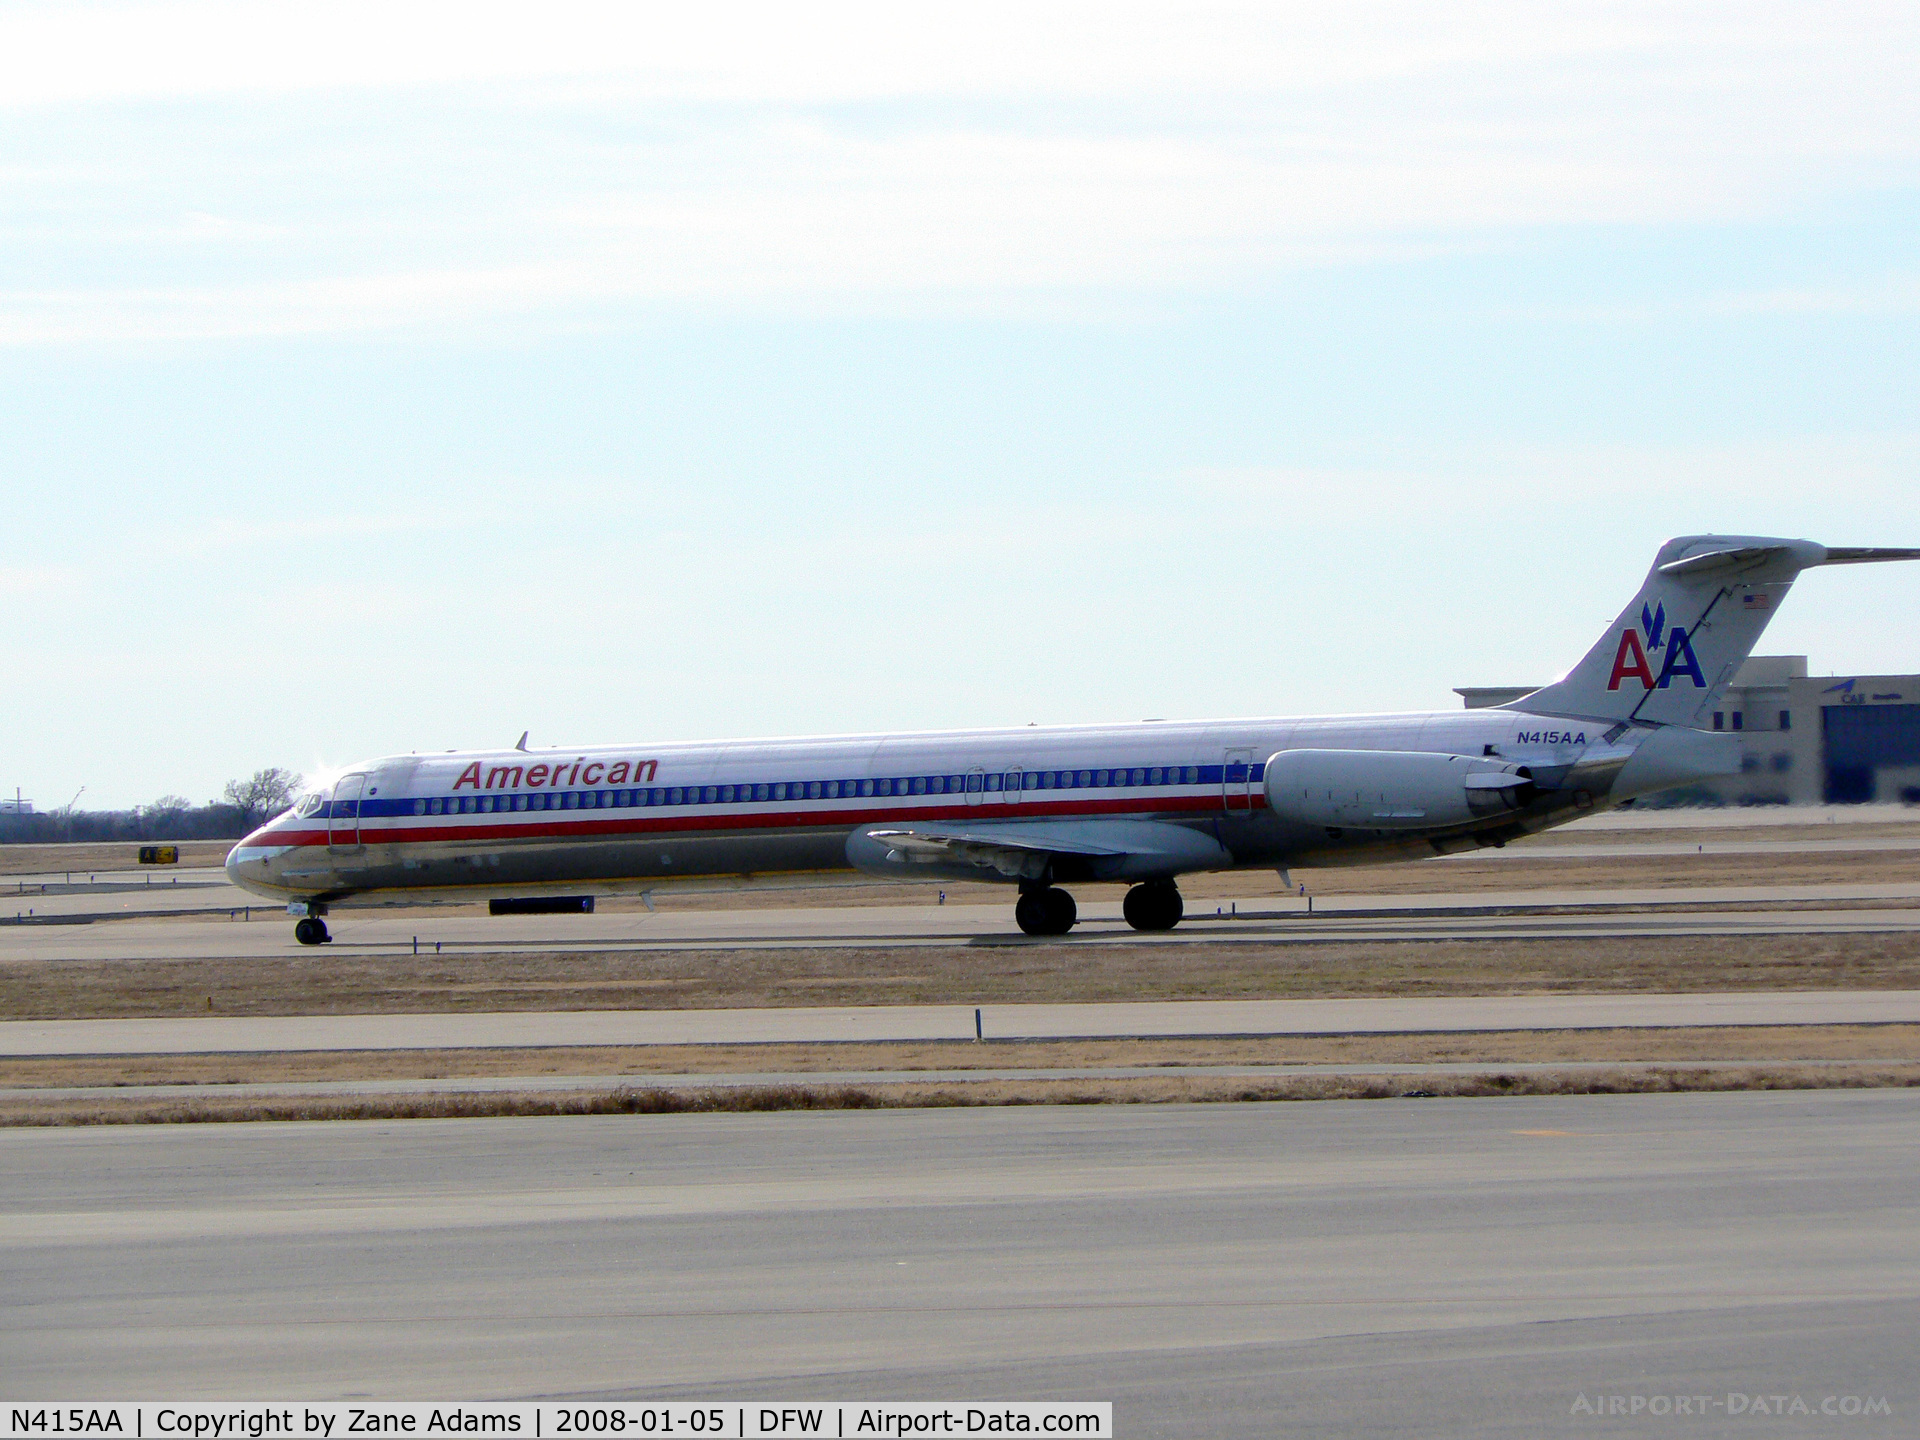 N415AA, 1986 McDonnell Douglas MD-82 (DC-9-82) C/N 49326, On the taxiway at DFW